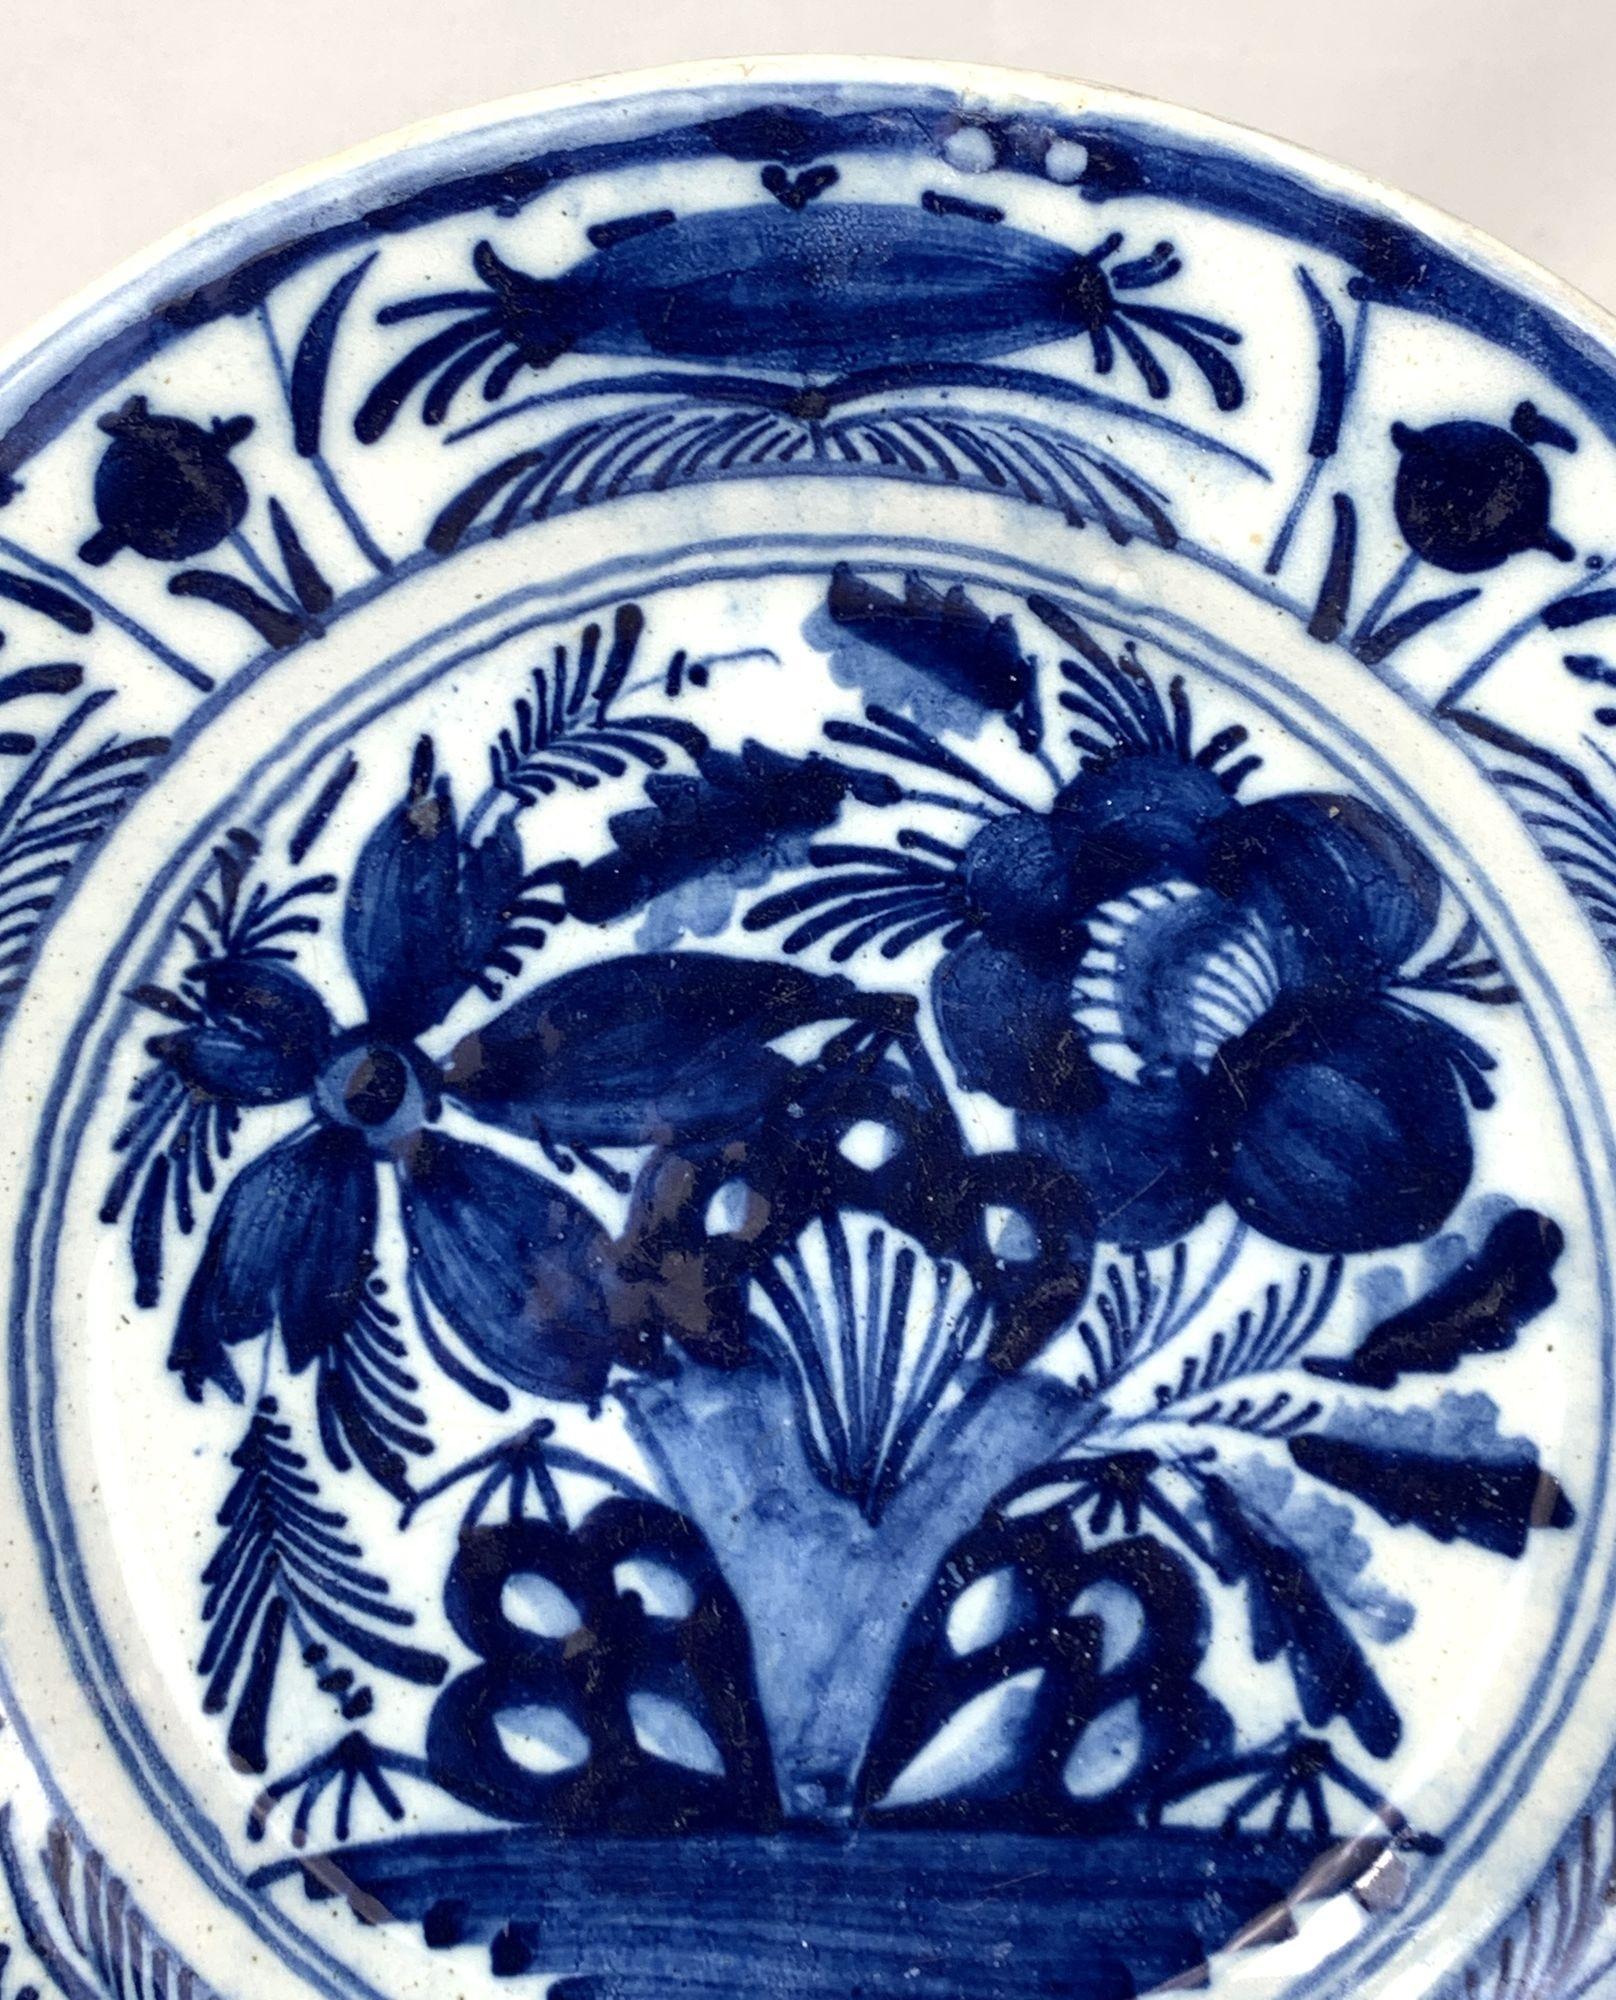 Blue and White Delft Plate or Dish Hand Painted Circa 1800 In Excellent Condition For Sale In Katonah, NY